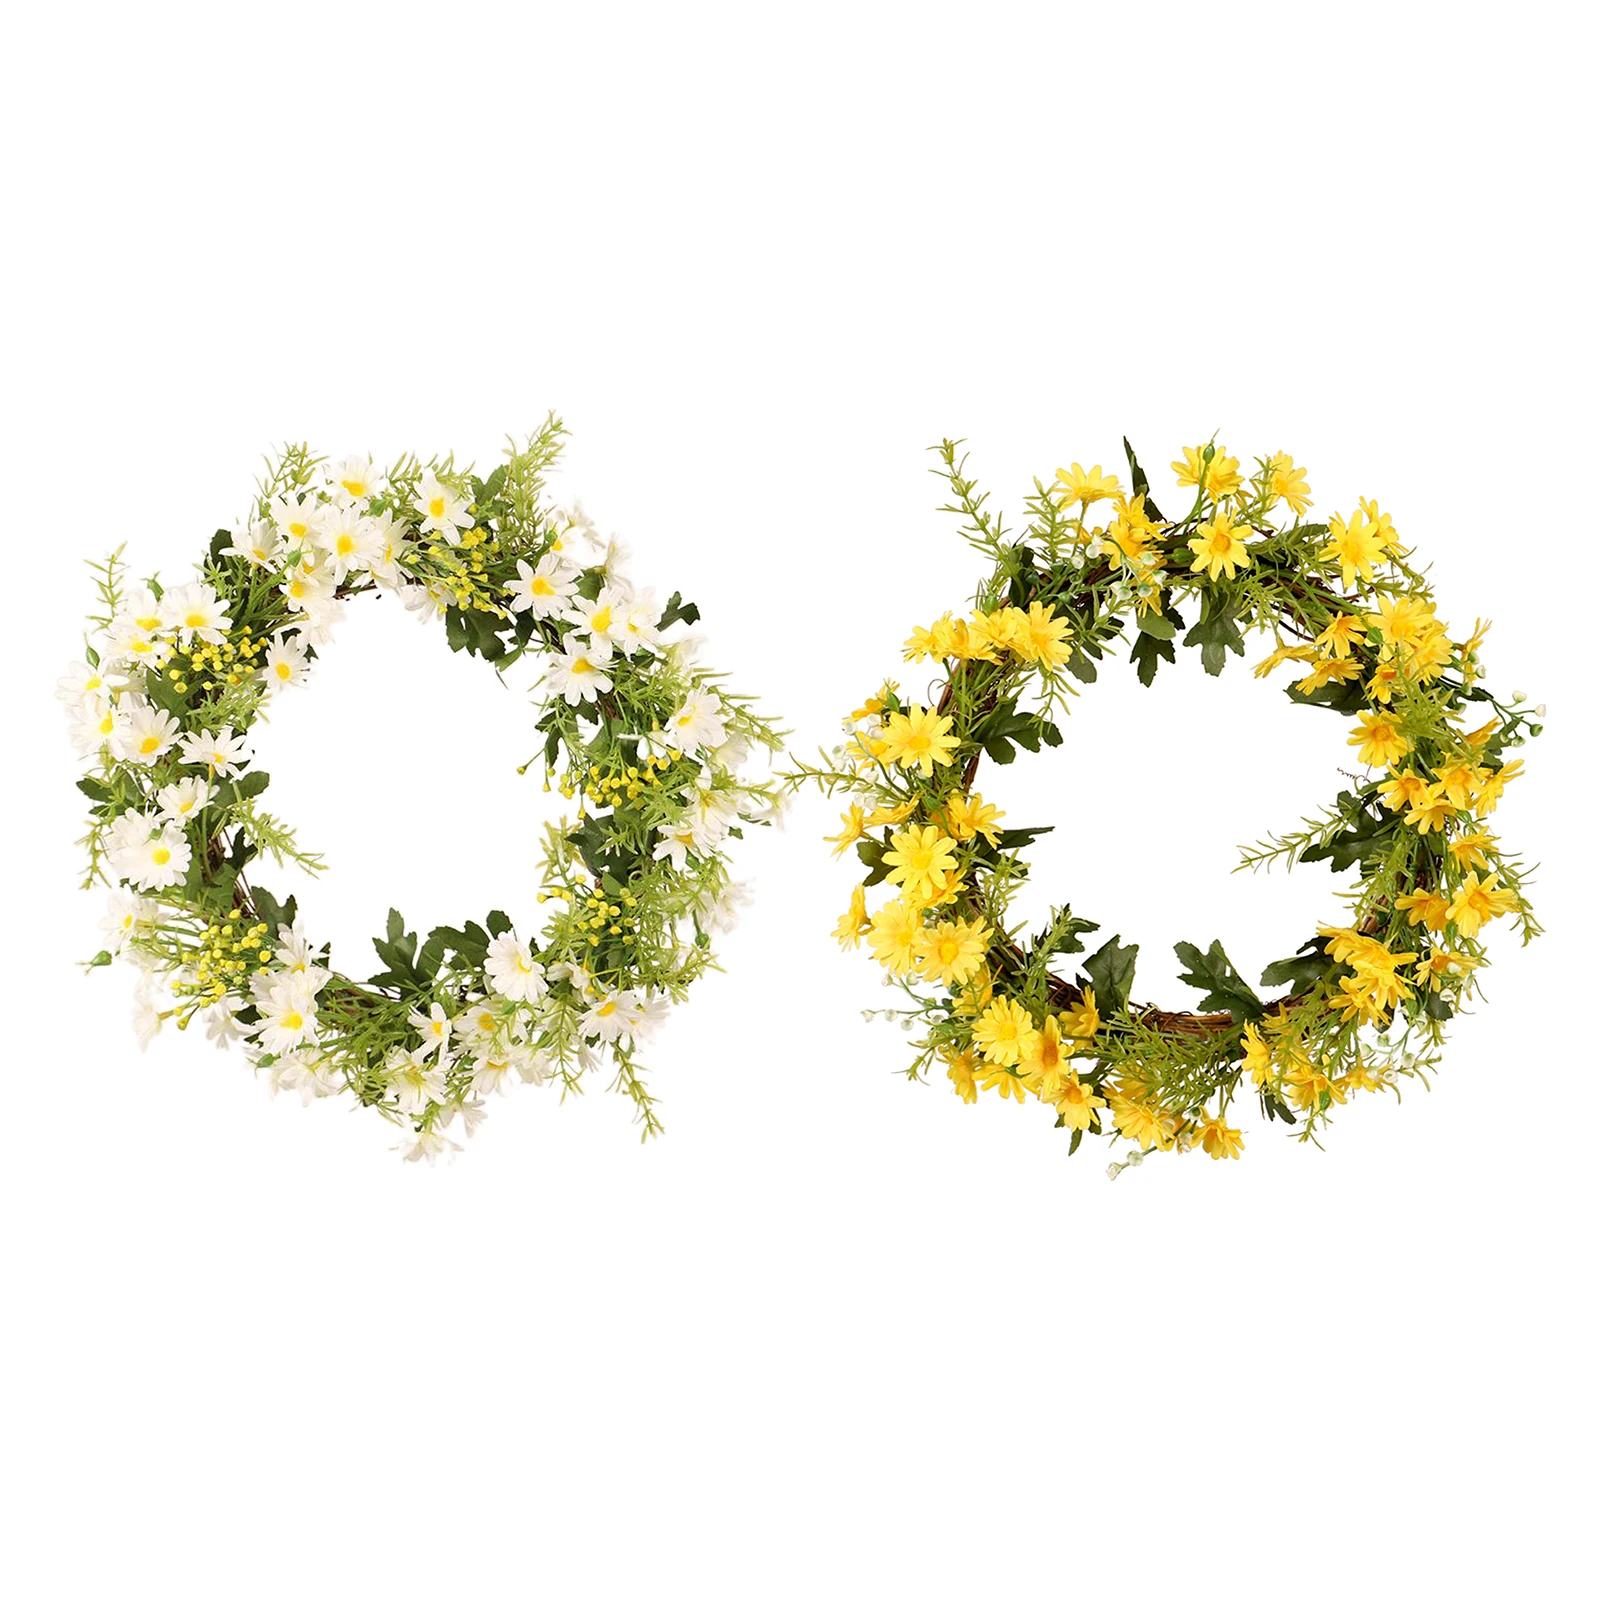 Artificial Floral Wreath, Silk Daisy Wreath Autumn Wildflowers Wreath for Front Door Wall Window Decor and Festival Celebration